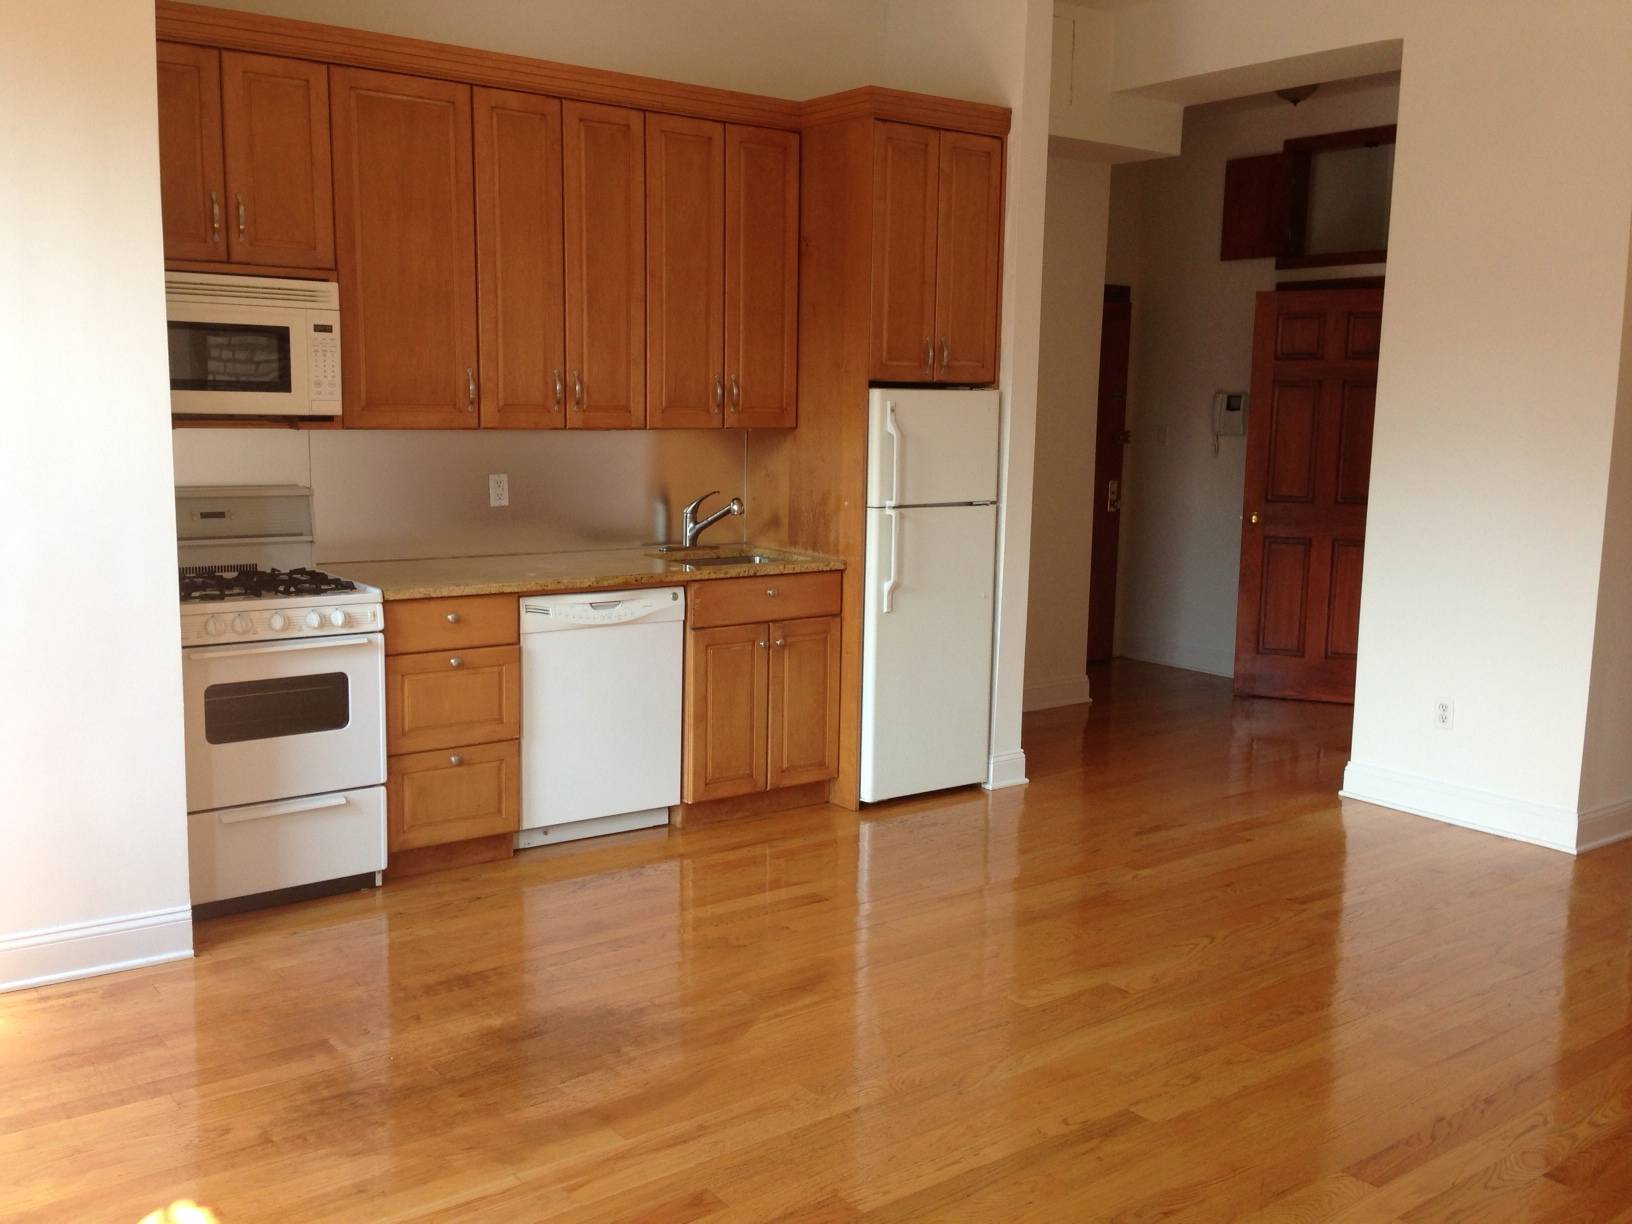 LOCATION ! LOCATION ! LOCATION ! LARGE 1BED | 1BATH ON 77th St & Columbus Ave 